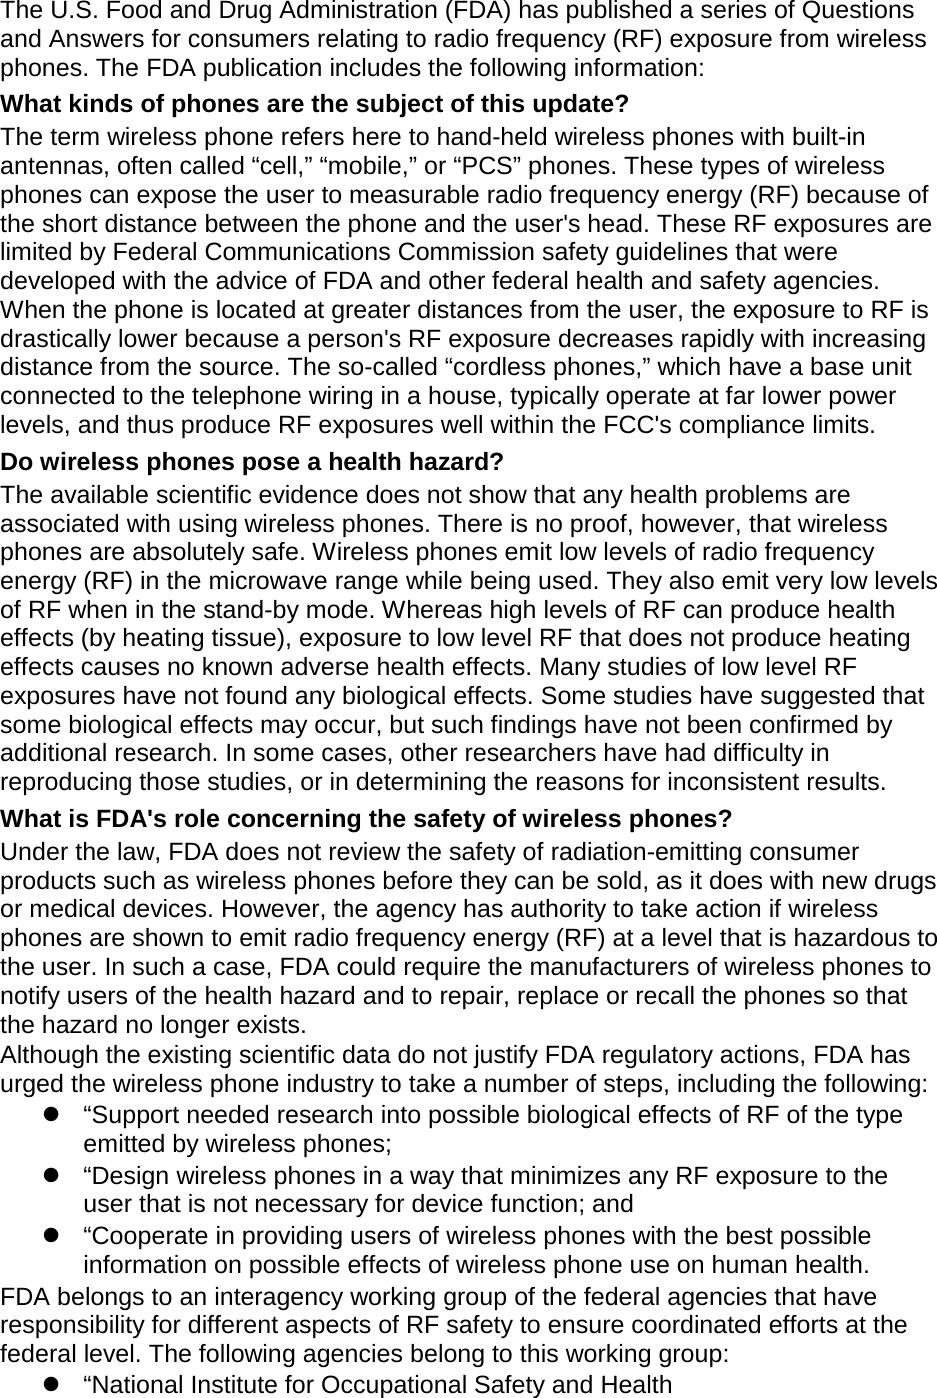 The U.S. Food and Drug Administration (FDA) has published a series of Questions and Answers for consumers relating to radio frequency (RF) exposure from wireless phones. The FDA publication includes the following information: What kinds of phones are the subject of this update? The term wireless phone refers here to hand-held wireless phones with built-in antennas, often called “cell,” “mobile,” or “PCS” phones. These types of wireless phones can expose the user to measurable radio frequency energy (RF) because of the short distance between the phone and the user&apos;s head. These RF exposures are limited by Federal Communications Commission safety guidelines that were developed with the advice of FDA and other federal health and safety agencies. When the phone is located at greater distances from the user, the exposure to RF is drastically lower because a person&apos;s RF exposure decreases rapidly with increasing distance from the source. The so-called “cordless phones,” which have a base unit connected to the telephone wiring in a house, typically operate at far lower power levels, and thus produce RF exposures well within the FCC&apos;s compliance limits. Do wireless phones pose a health hazard? The available scientific evidence does not show that any health problems are associated with using wireless phones. There is no proof, however, that wireless phones are absolutely safe. Wireless phones emit low levels of radio frequency energy (RF) in the microwave range while being used. They also emit very low levels of RF when in the stand-by mode. Whereas high levels of RF can produce health effects (by heating tissue), exposure to low level RF that does not produce heating effects causes no known adverse health effects. Many studies of low level RF exposures have not found any biological effects. Some studies have suggested that some biological effects may occur, but such findings have not been confirmed by additional research. In some cases, other researchers have had difficulty in reproducing those studies, or in determining the reasons for inconsistent results. What is FDA&apos;s role concerning the safety of wireless phones? Under the law, FDA does not review the safety of radiation-emitting consumer products such as wireless phones before they can be sold, as it does with new drugs or medical devices. However, the agency has authority to take action if wireless phones are shown to emit radio frequency energy (RF) at a level that is hazardous to the user. In such a case, FDA could require the manufacturers of wireless phones to notify users of the health hazard and to repair, replace or recall the phones so that the hazard no longer exists. Although the existing scientific data do not justify FDA regulatory actions, FDA has urged the wireless phone industry to take a number of steps, including the following: “Support needed research into possible biological effects of RF of the typeemitted by wireless phones;“Design wireless phones in a way that minimizes any RF exposure to theuser that is not necessary for device function; and“Cooperate in providing users of wireless phones with the best possibleinformation on possible effects of wireless phone use on human health.FDA belongs to an interagency working group of the federal agencies that have responsibility for different aspects of RF safety to ensure coordinated efforts at the federal level. The following agencies belong to this working group: “National Institute for Occupational Safety and Health